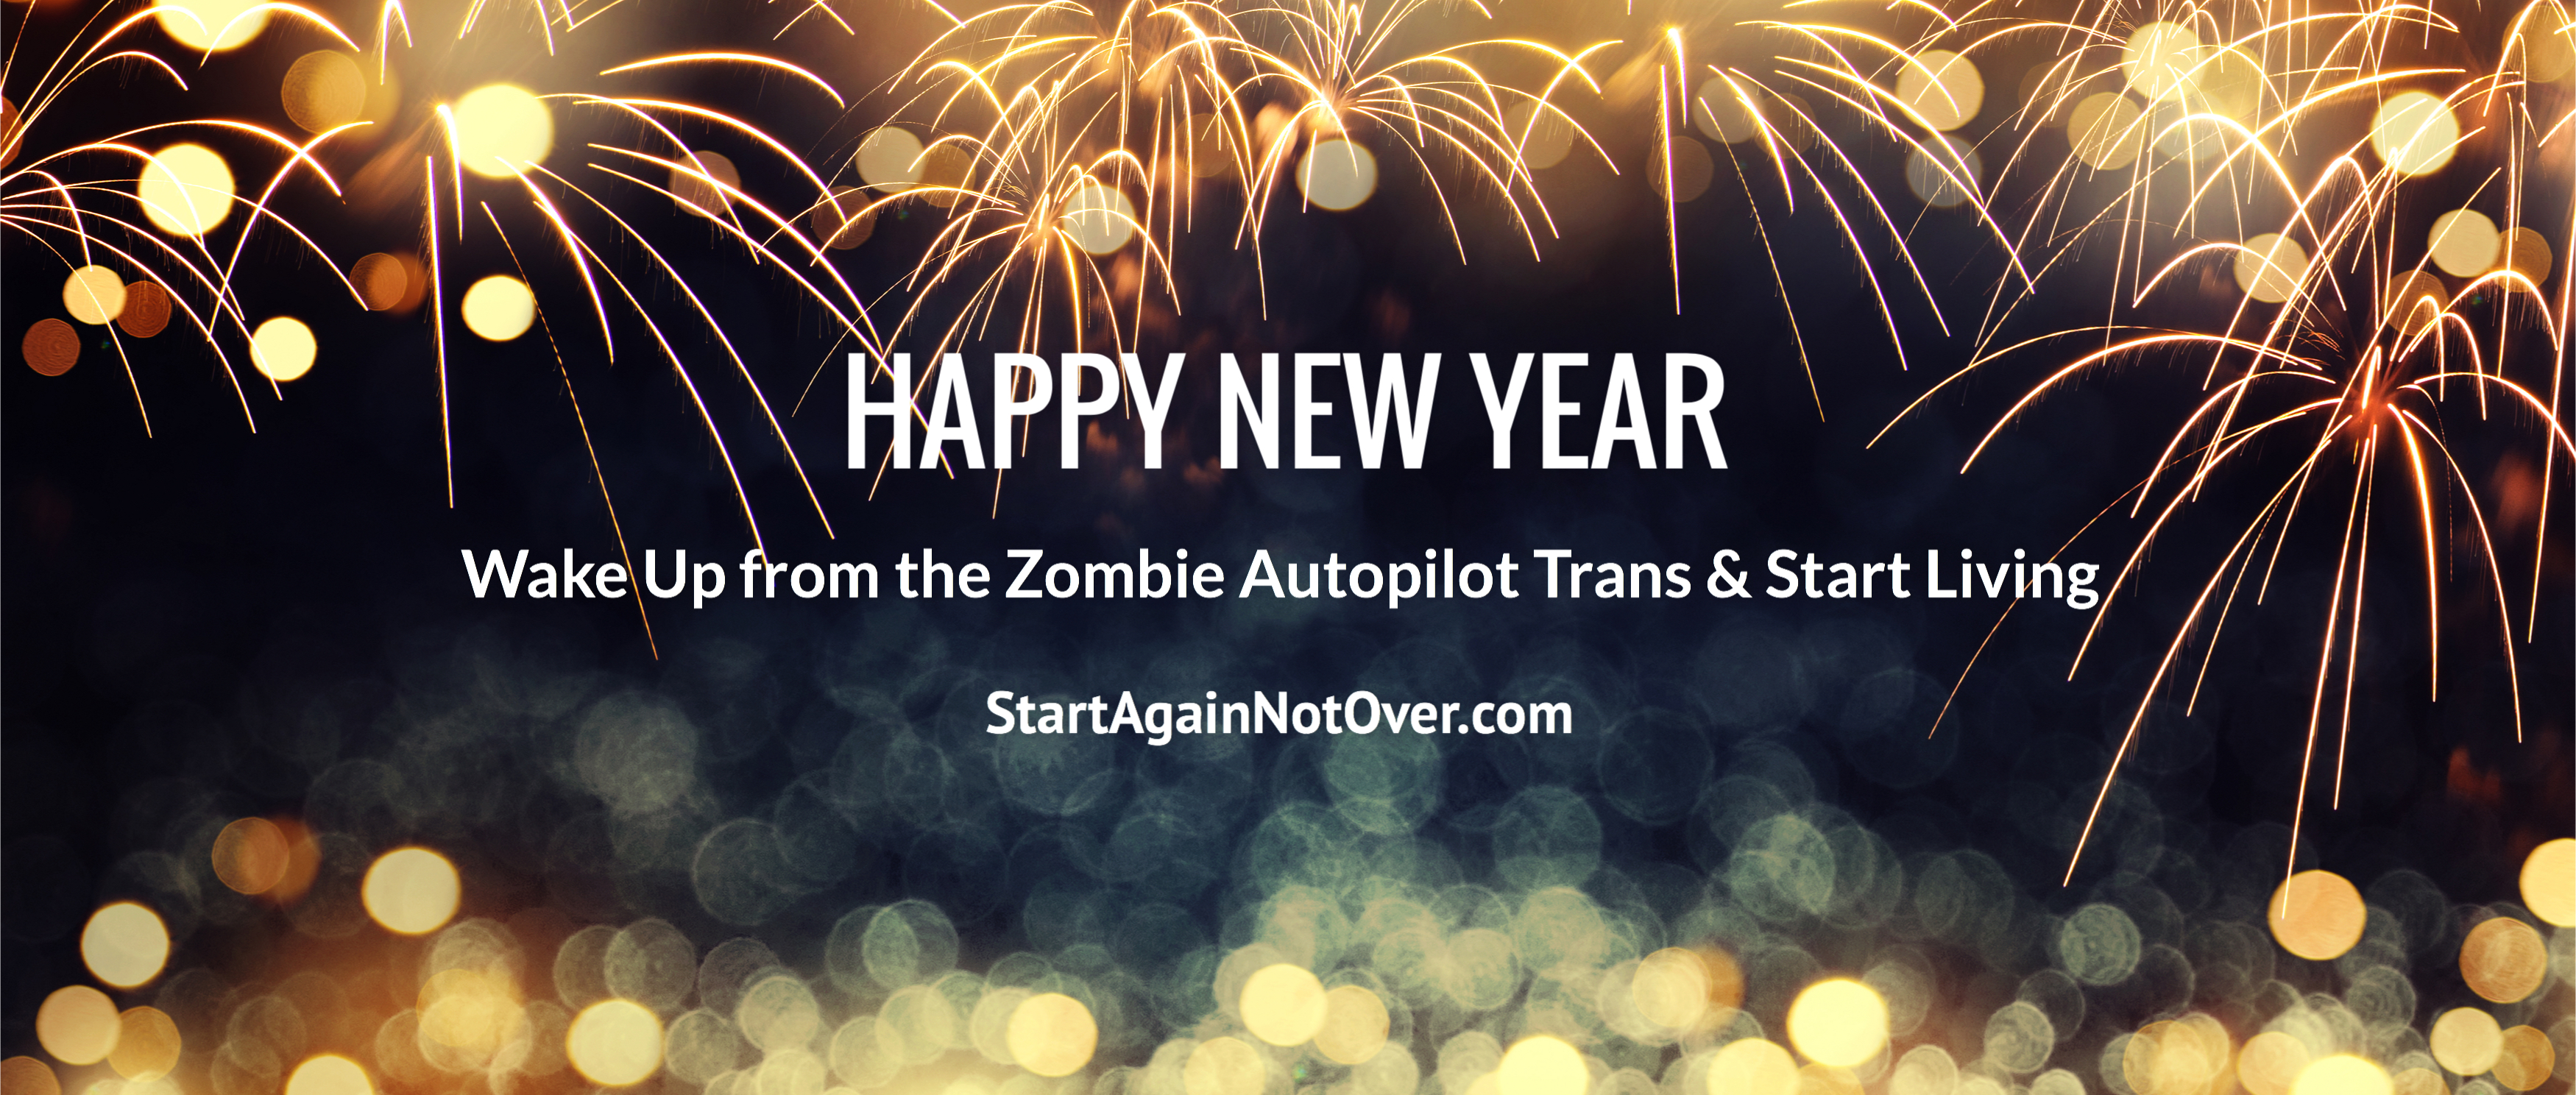 Happy New Year: Wake Up from the Zombie Autopilot Trans & Start Living